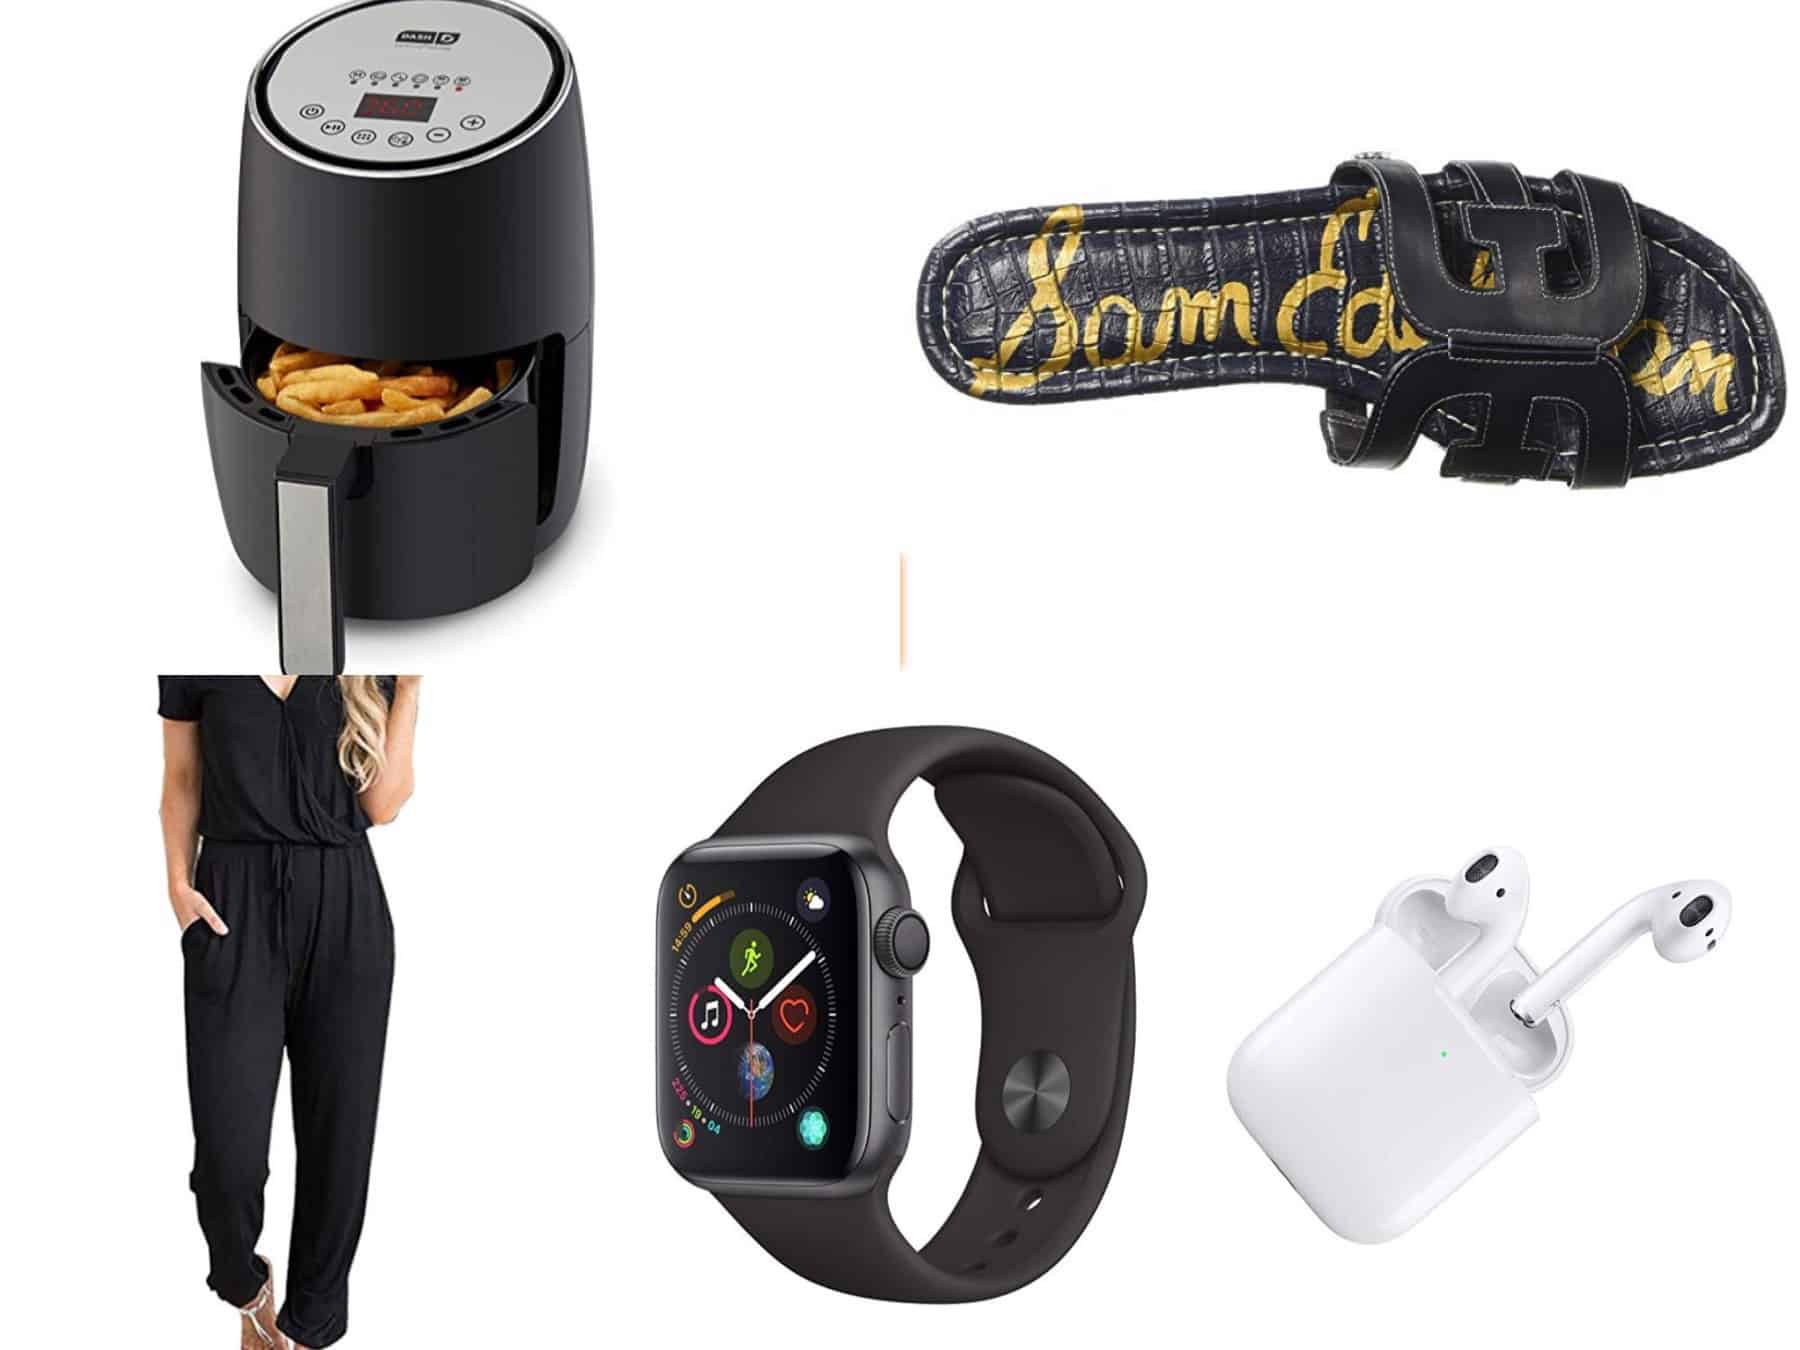 Top Amazon Prime Day Deals You Shouldn’t Miss